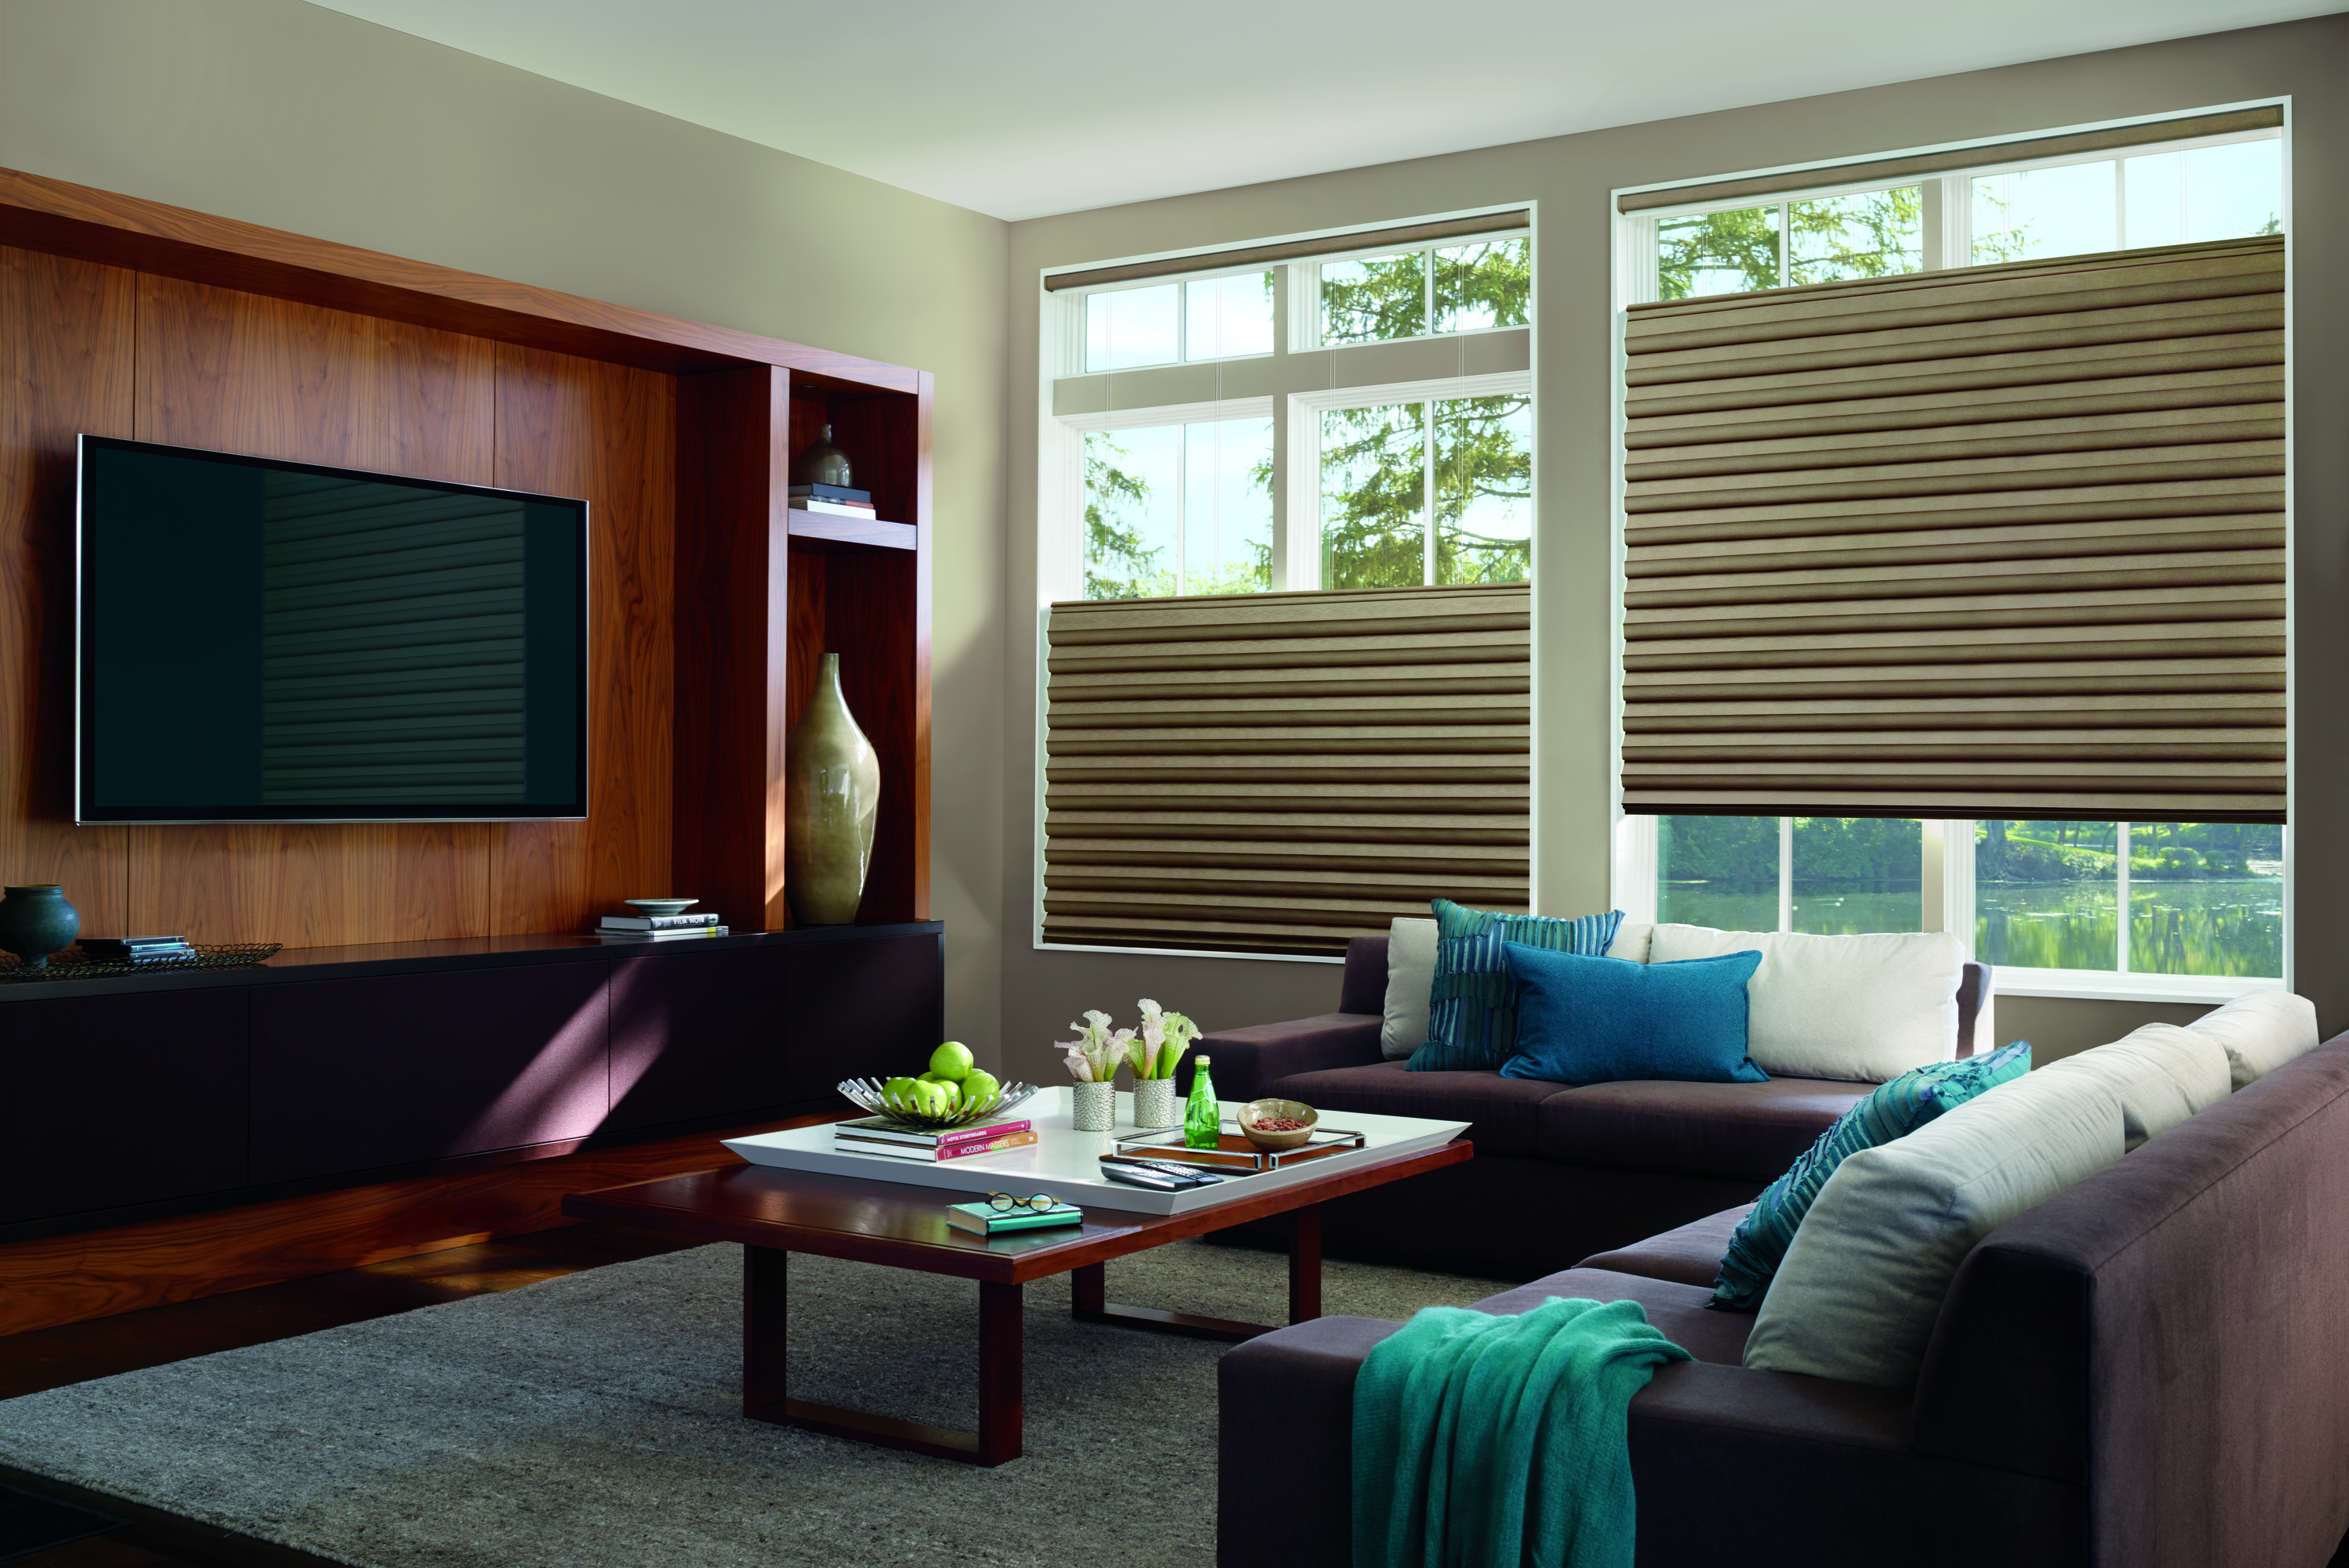 Solera Soft Shades with PowerView motorization in living room